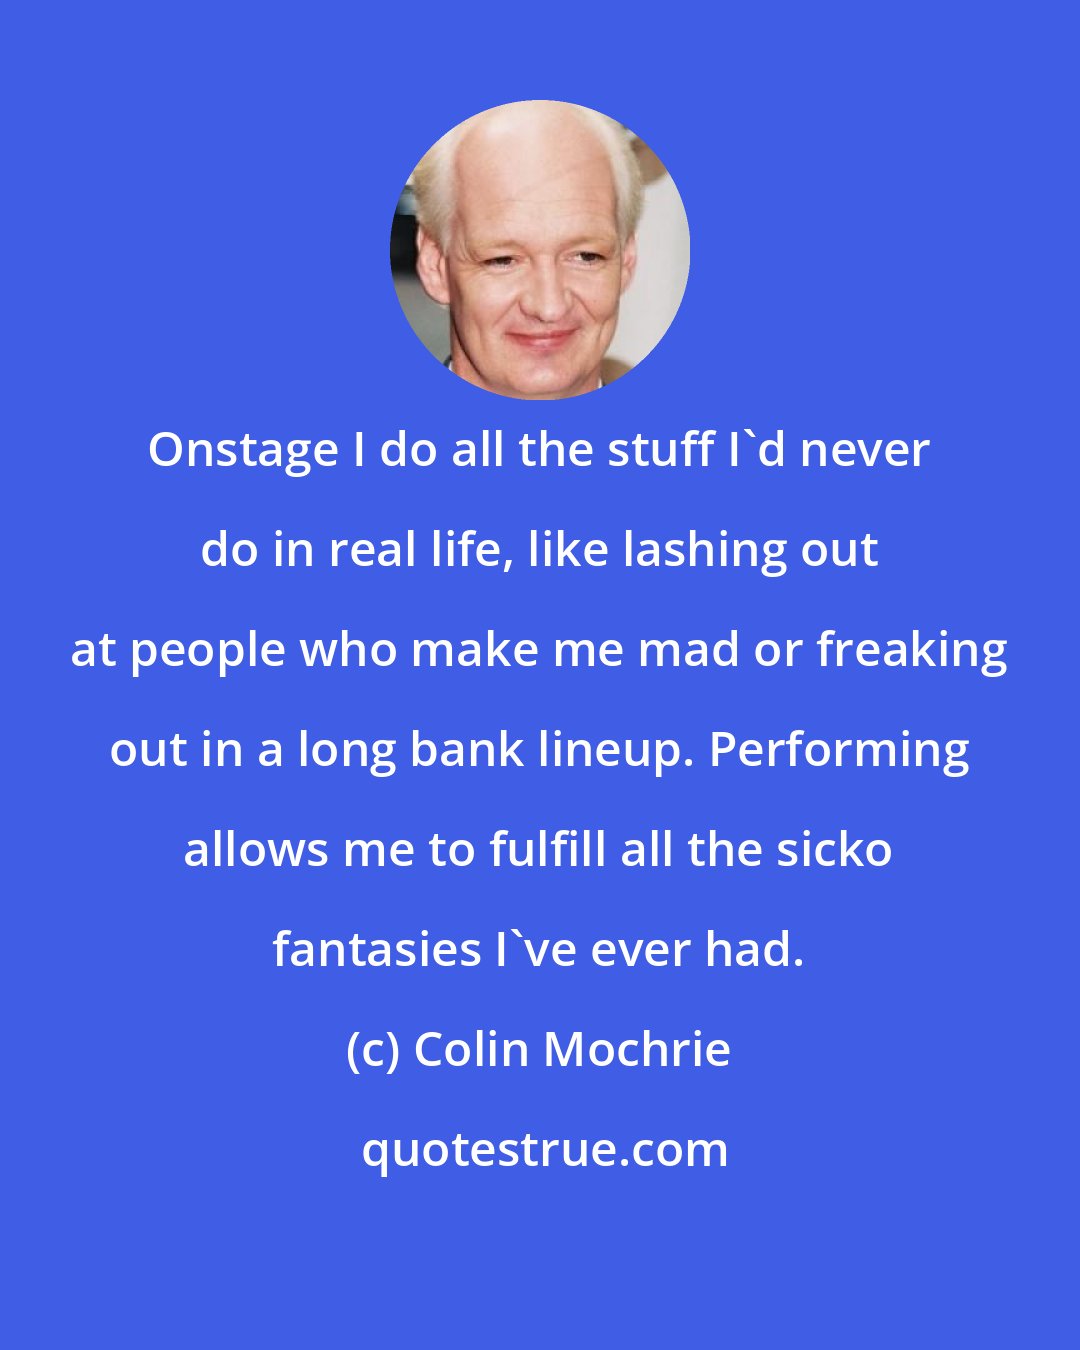 Colin Mochrie: Onstage I do all the stuff I'd never do in real life, like lashing out at people who make me mad or freaking out in a long bank lineup. Performing allows me to fulfill all the sicko fantasies I've ever had.